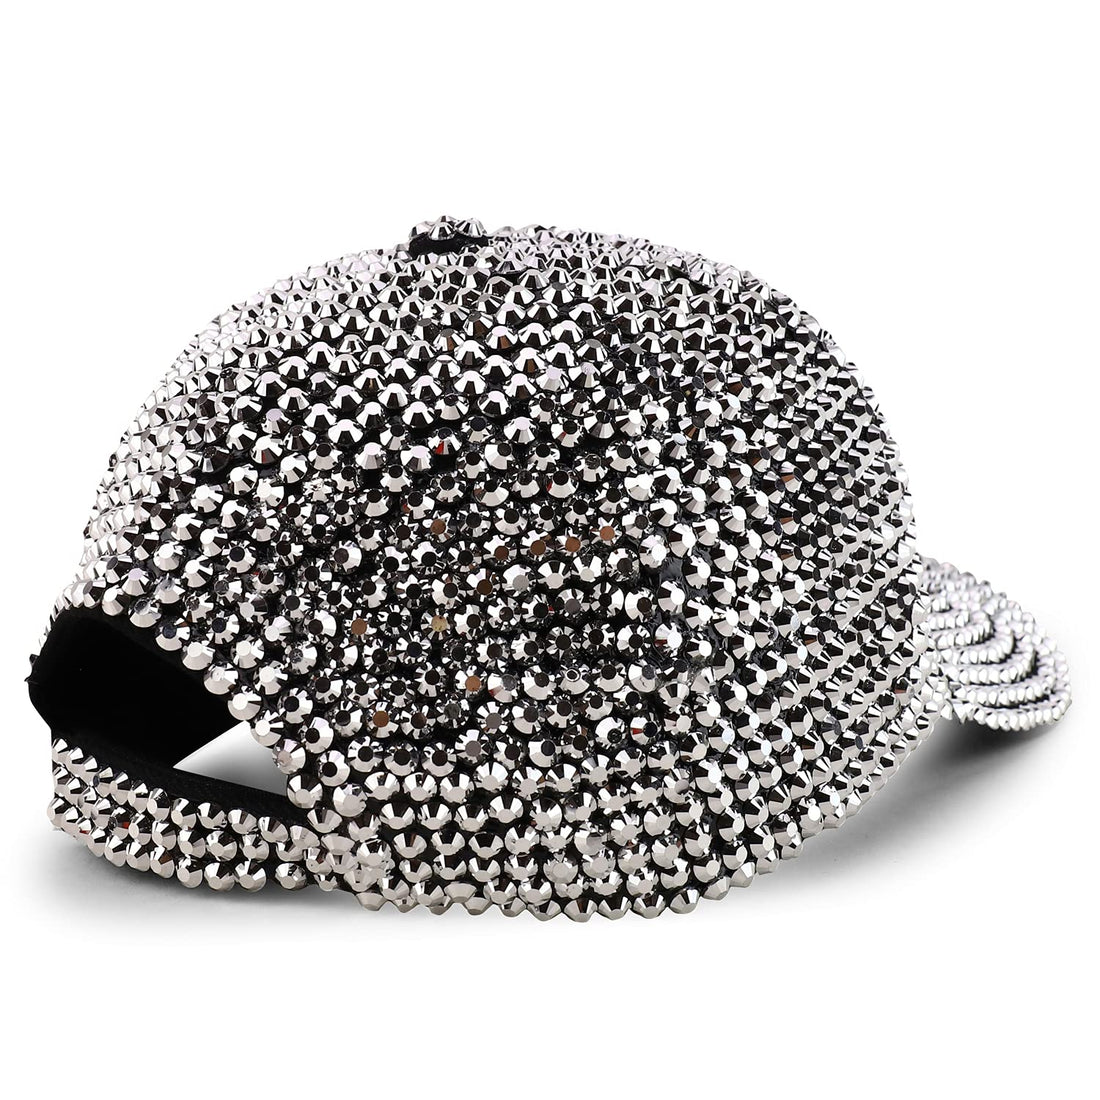 Trendy Apparel Shop Bling Stone Studs Bedazzle Structured Baseball Cap